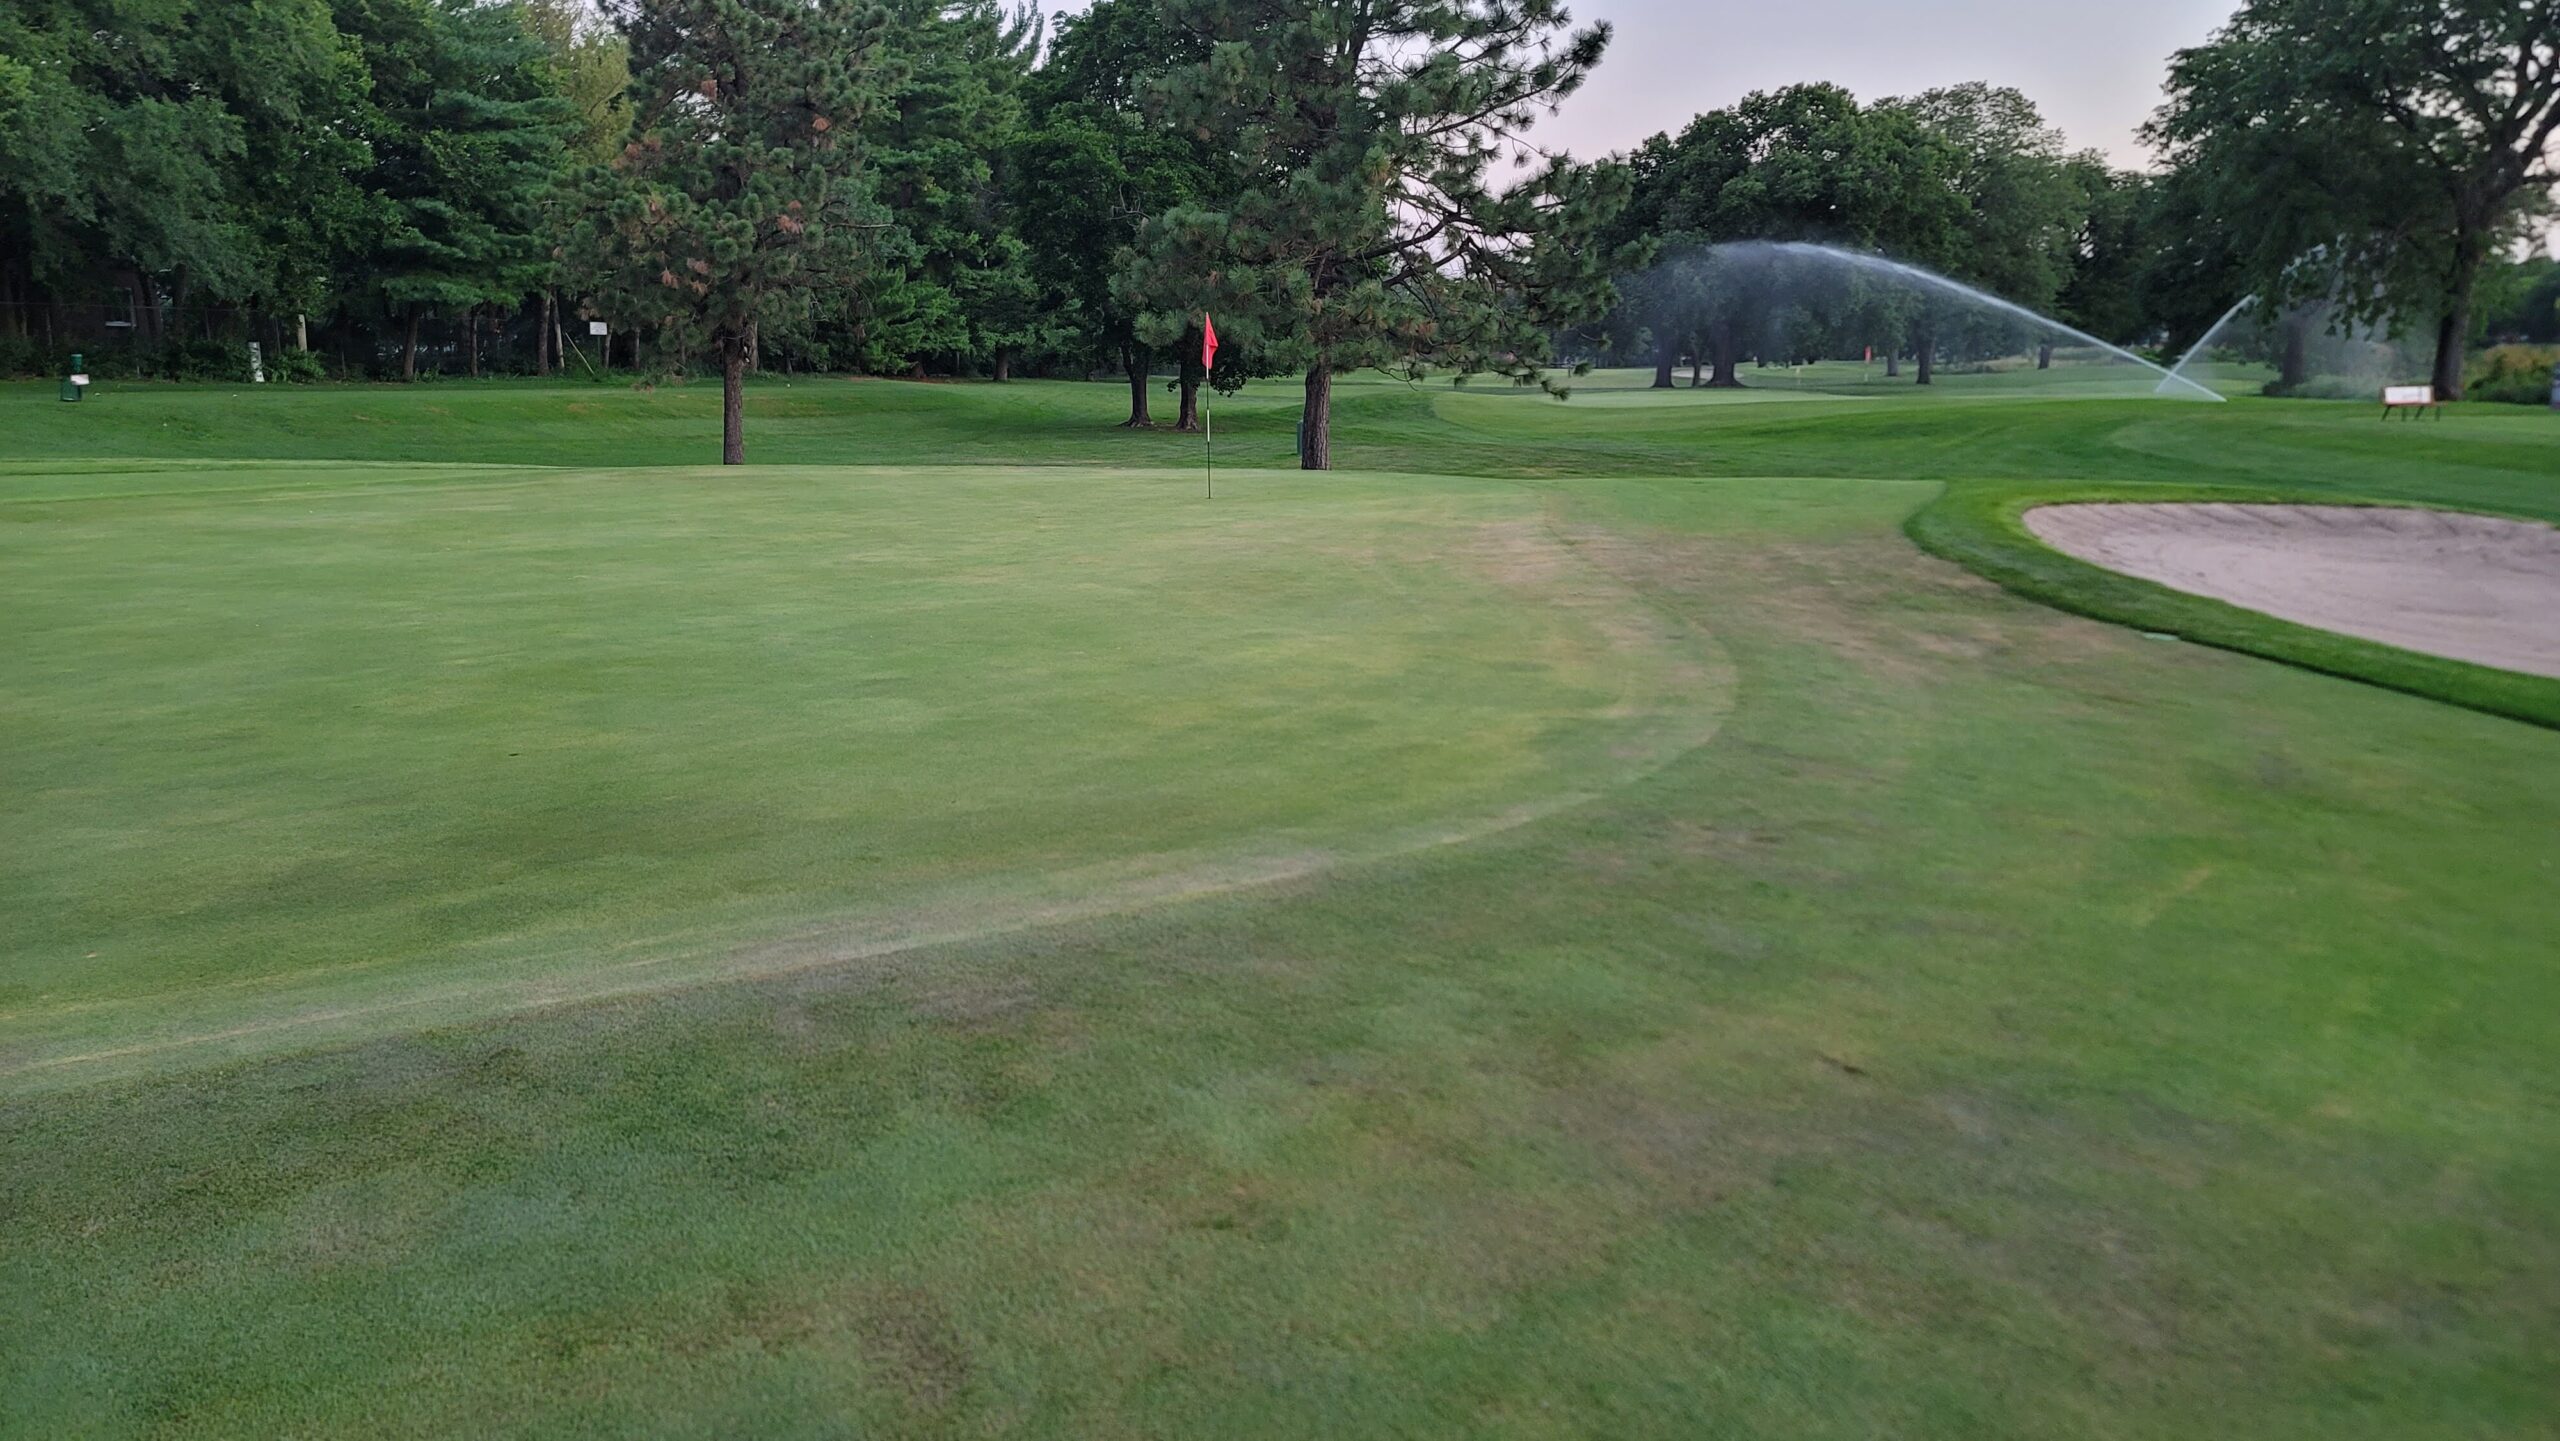 Causes and Management of Turf Stress